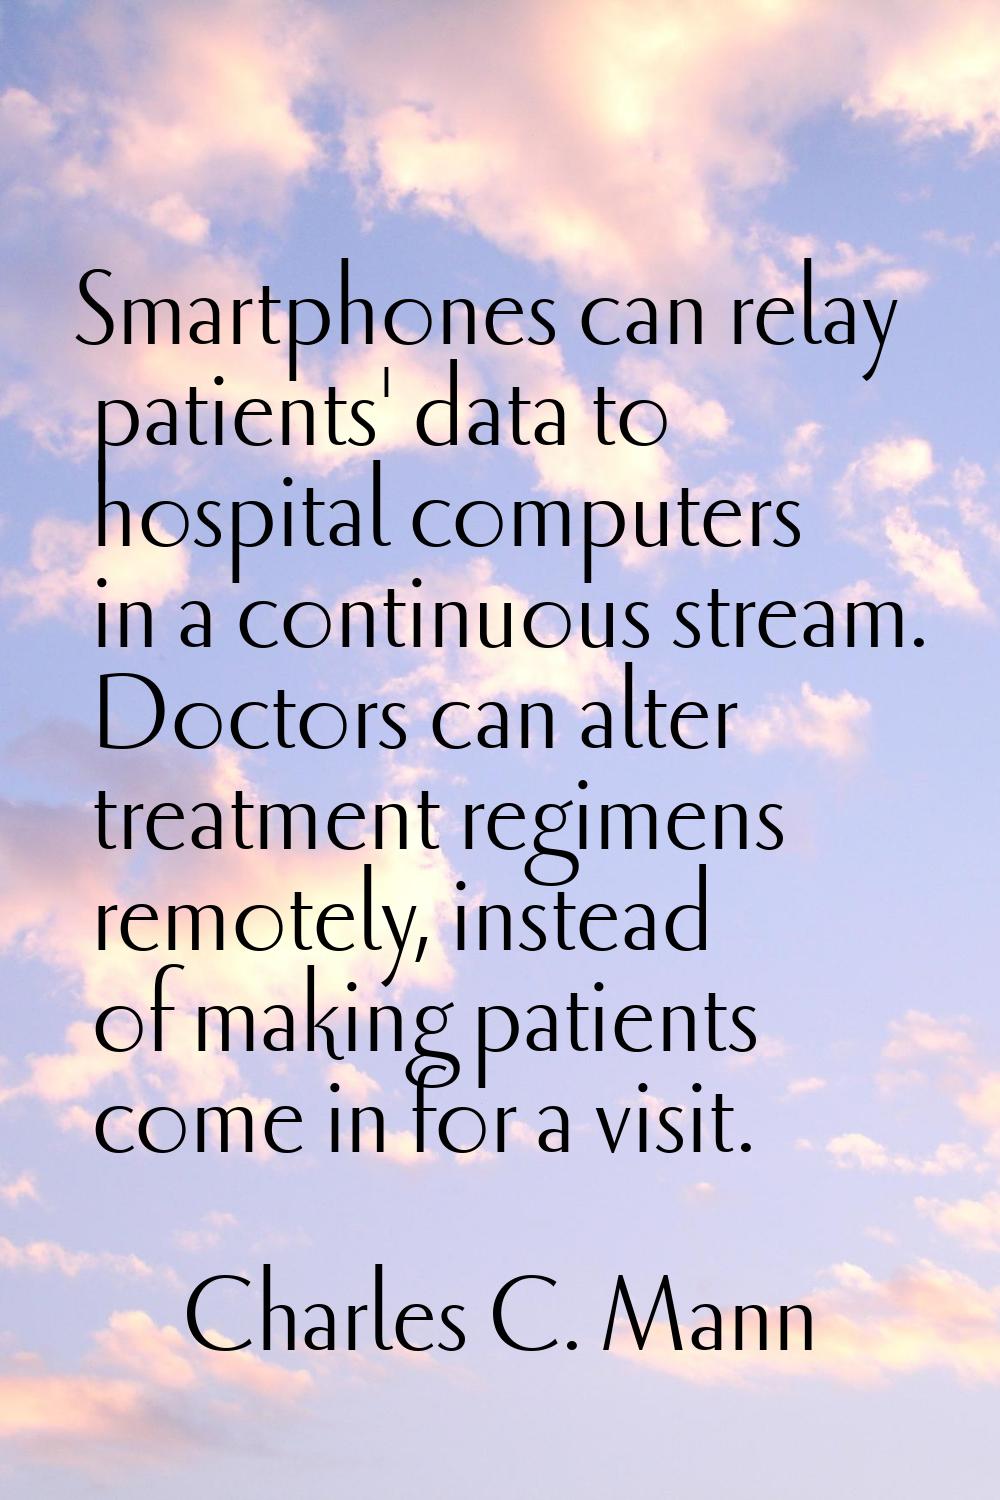 Smartphones can relay patients' data to hospital computers in a continuous stream. Doctors can alte